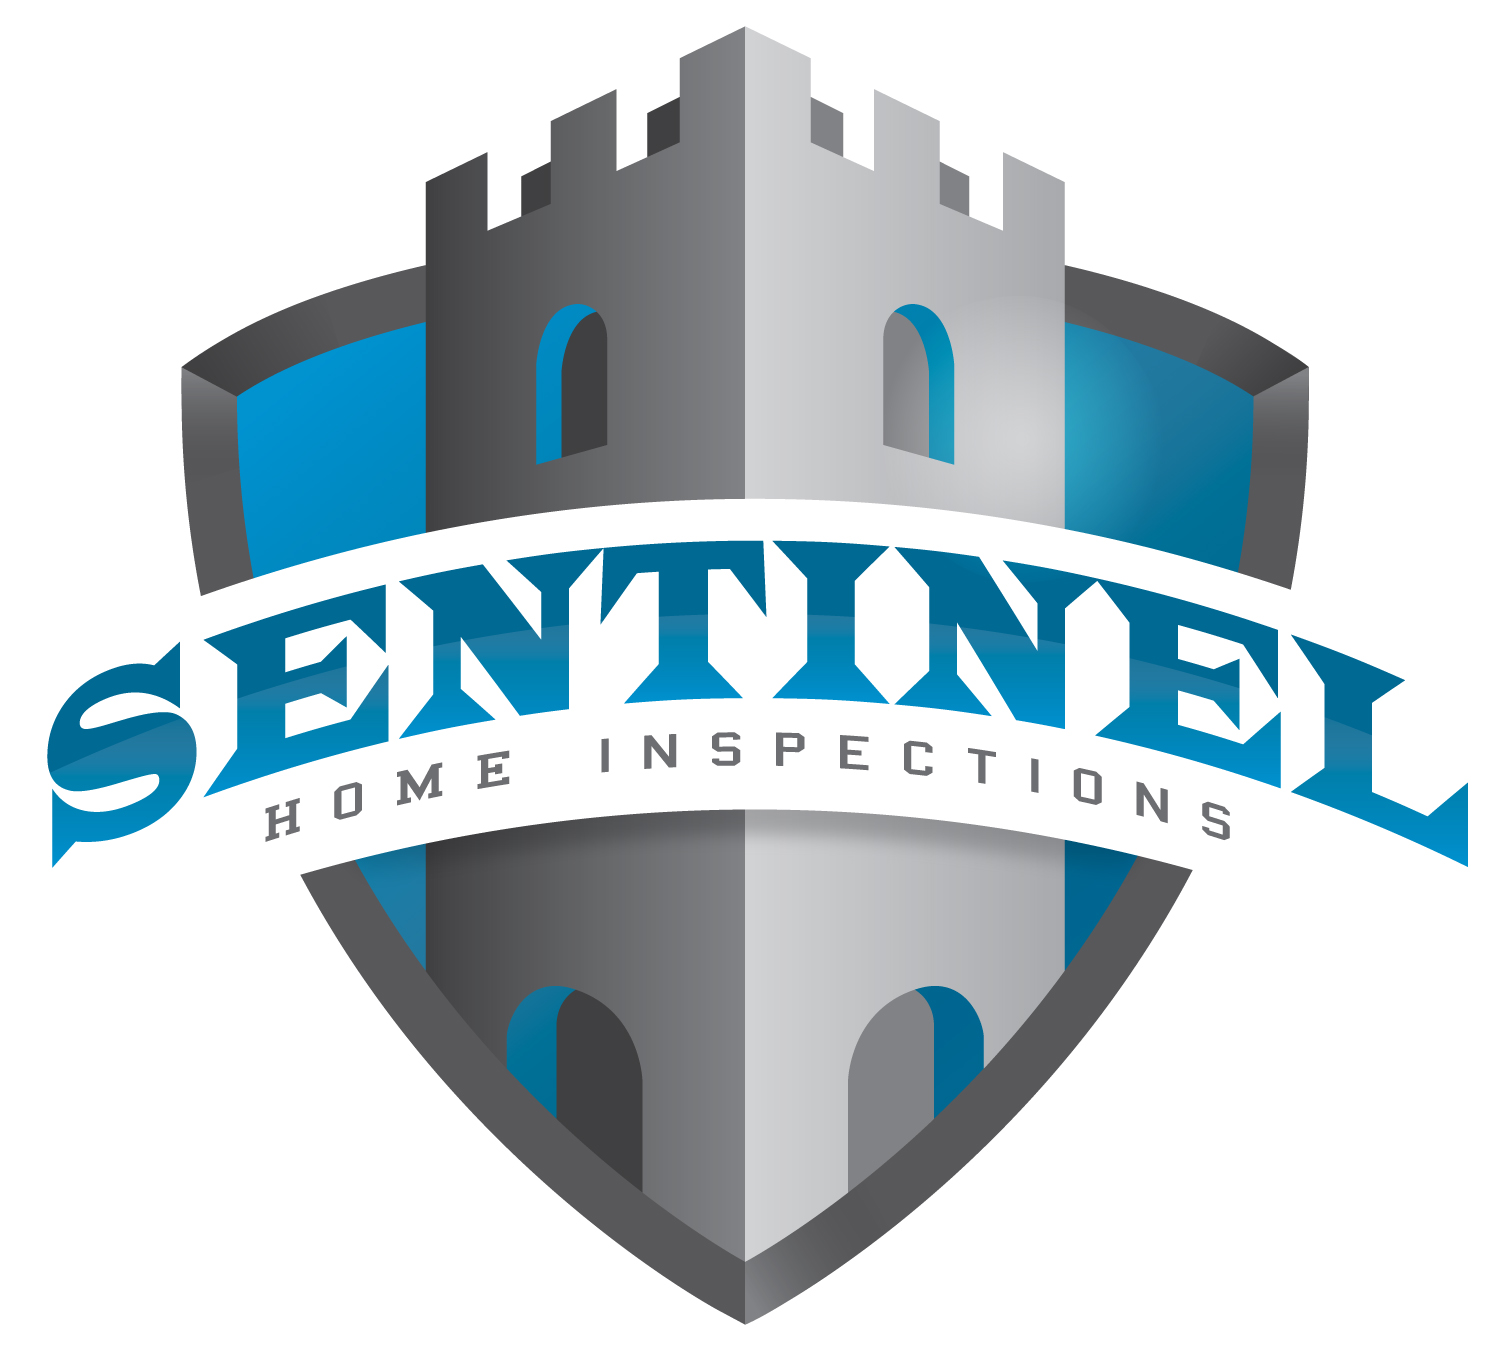 Sentinel Home Inspection